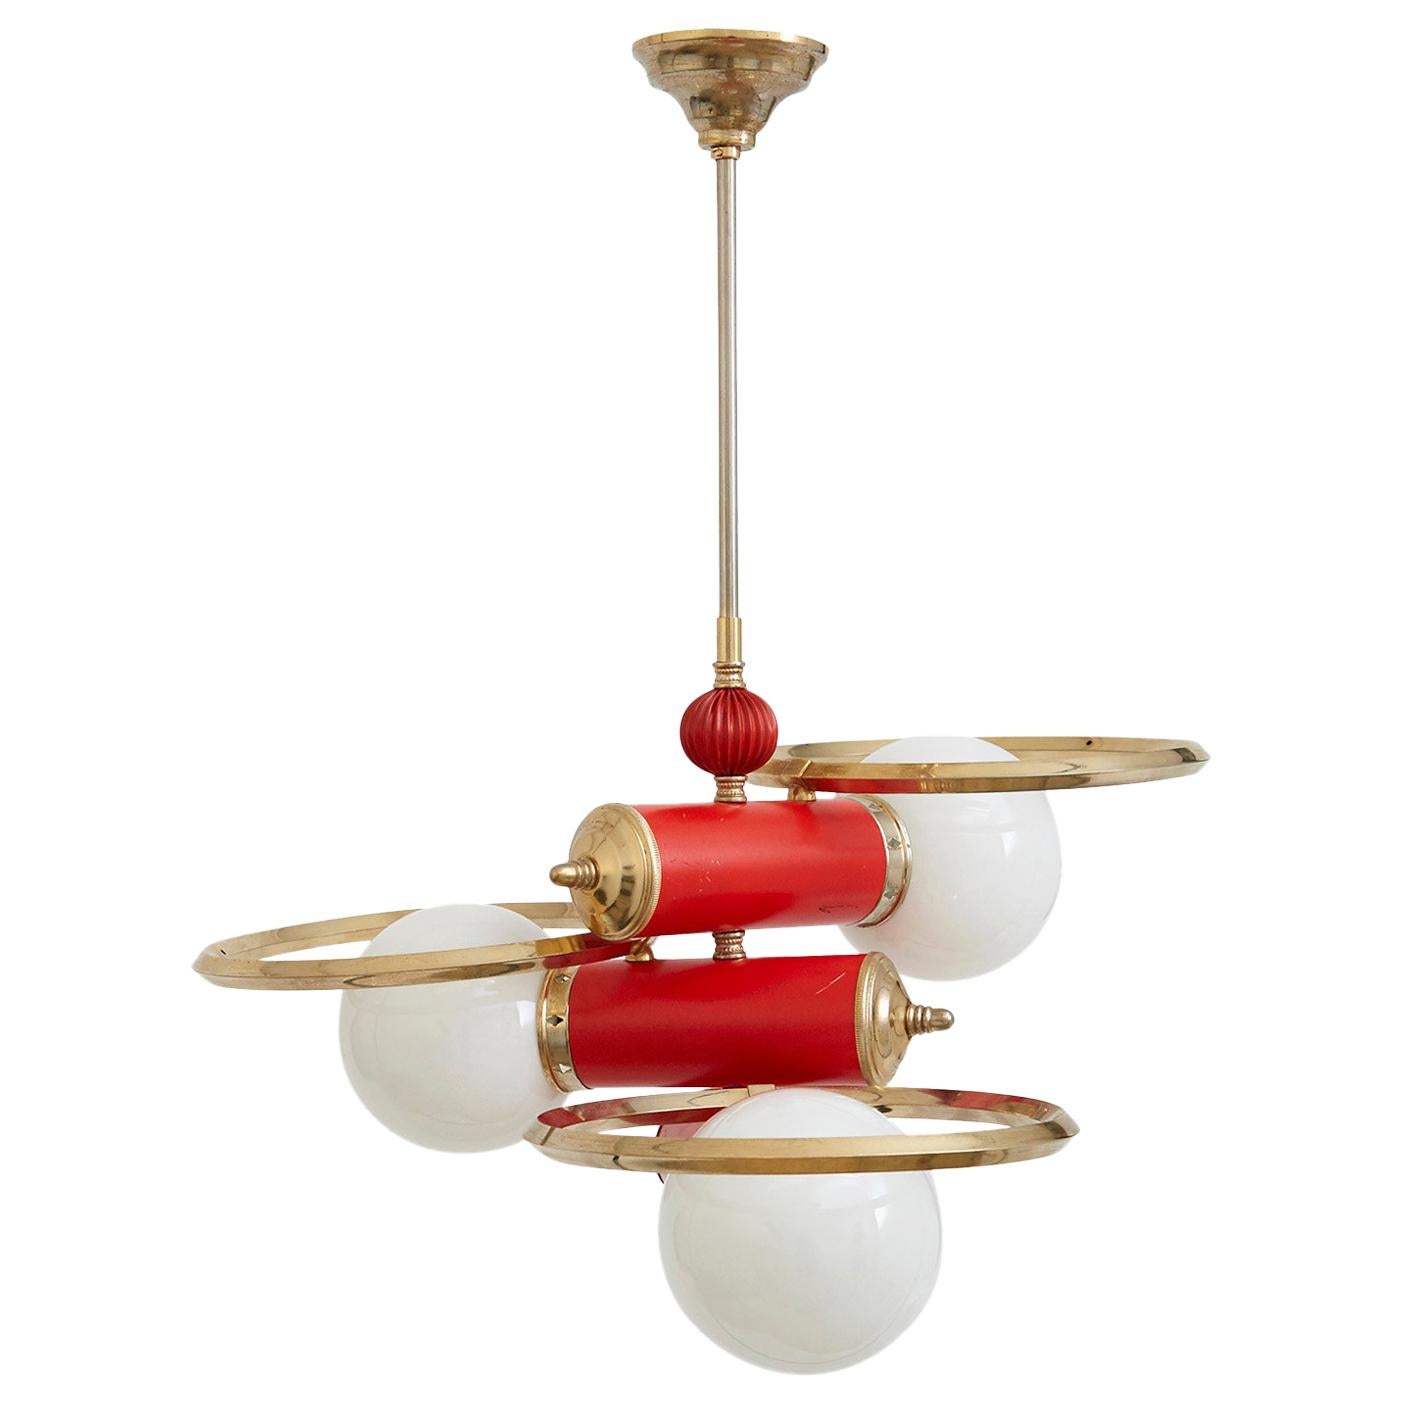 Spanish Midcentury Red and Brass Three-Light Pendant with Milk Glass Shades